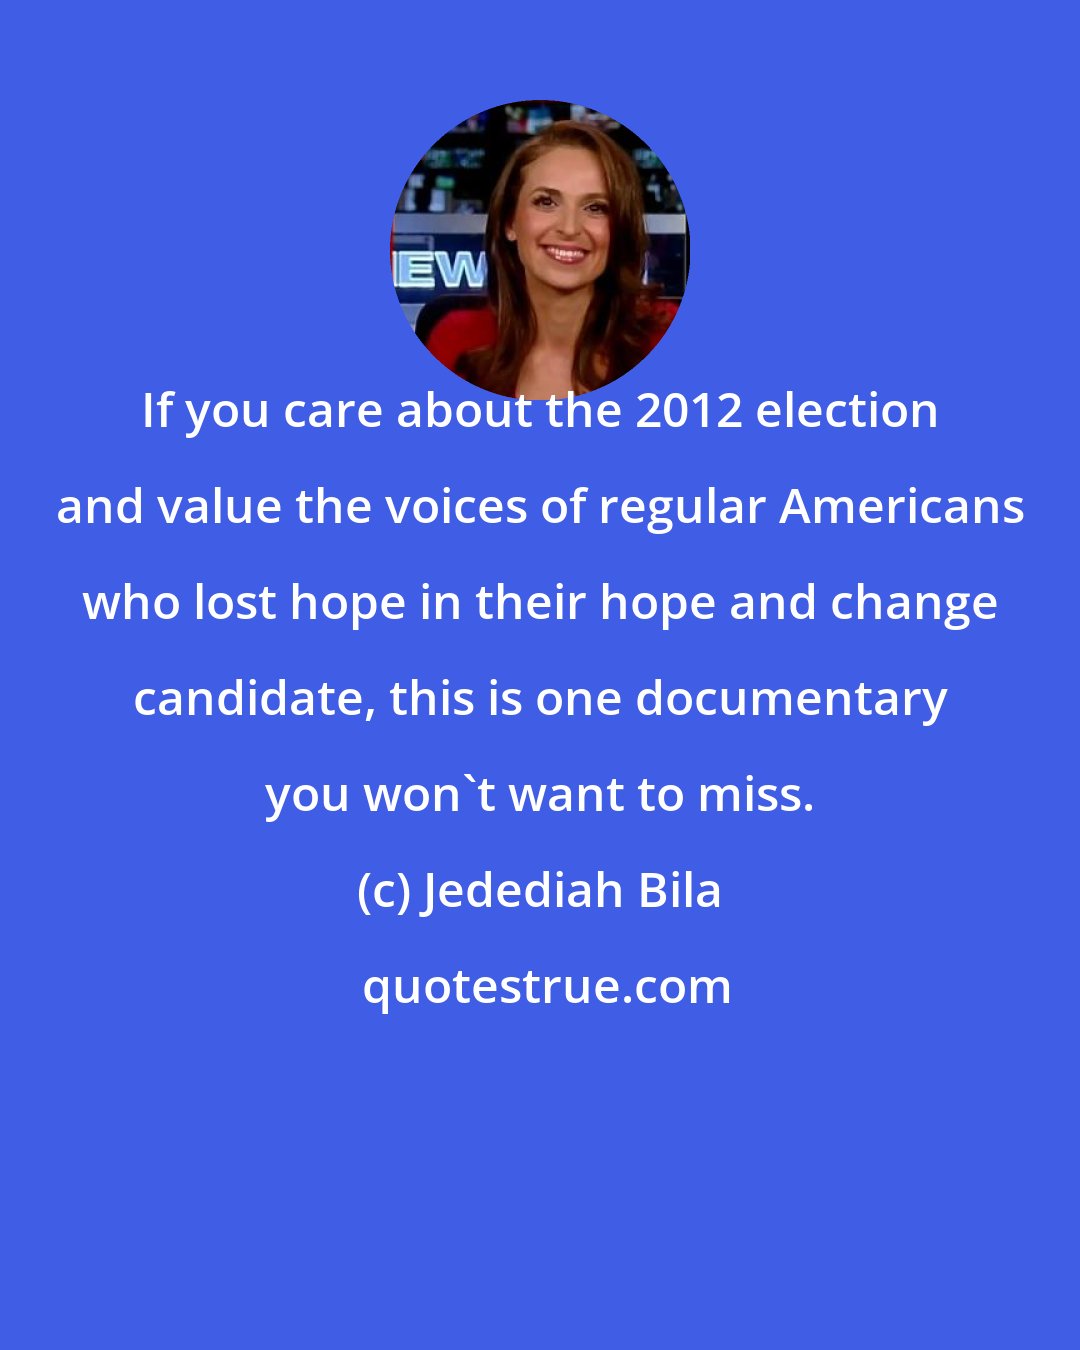 Jedediah Bila: If you care about the 2012 election and value the voices of regular Americans who lost hope in their hope and change candidate, this is one documentary you won't want to miss.